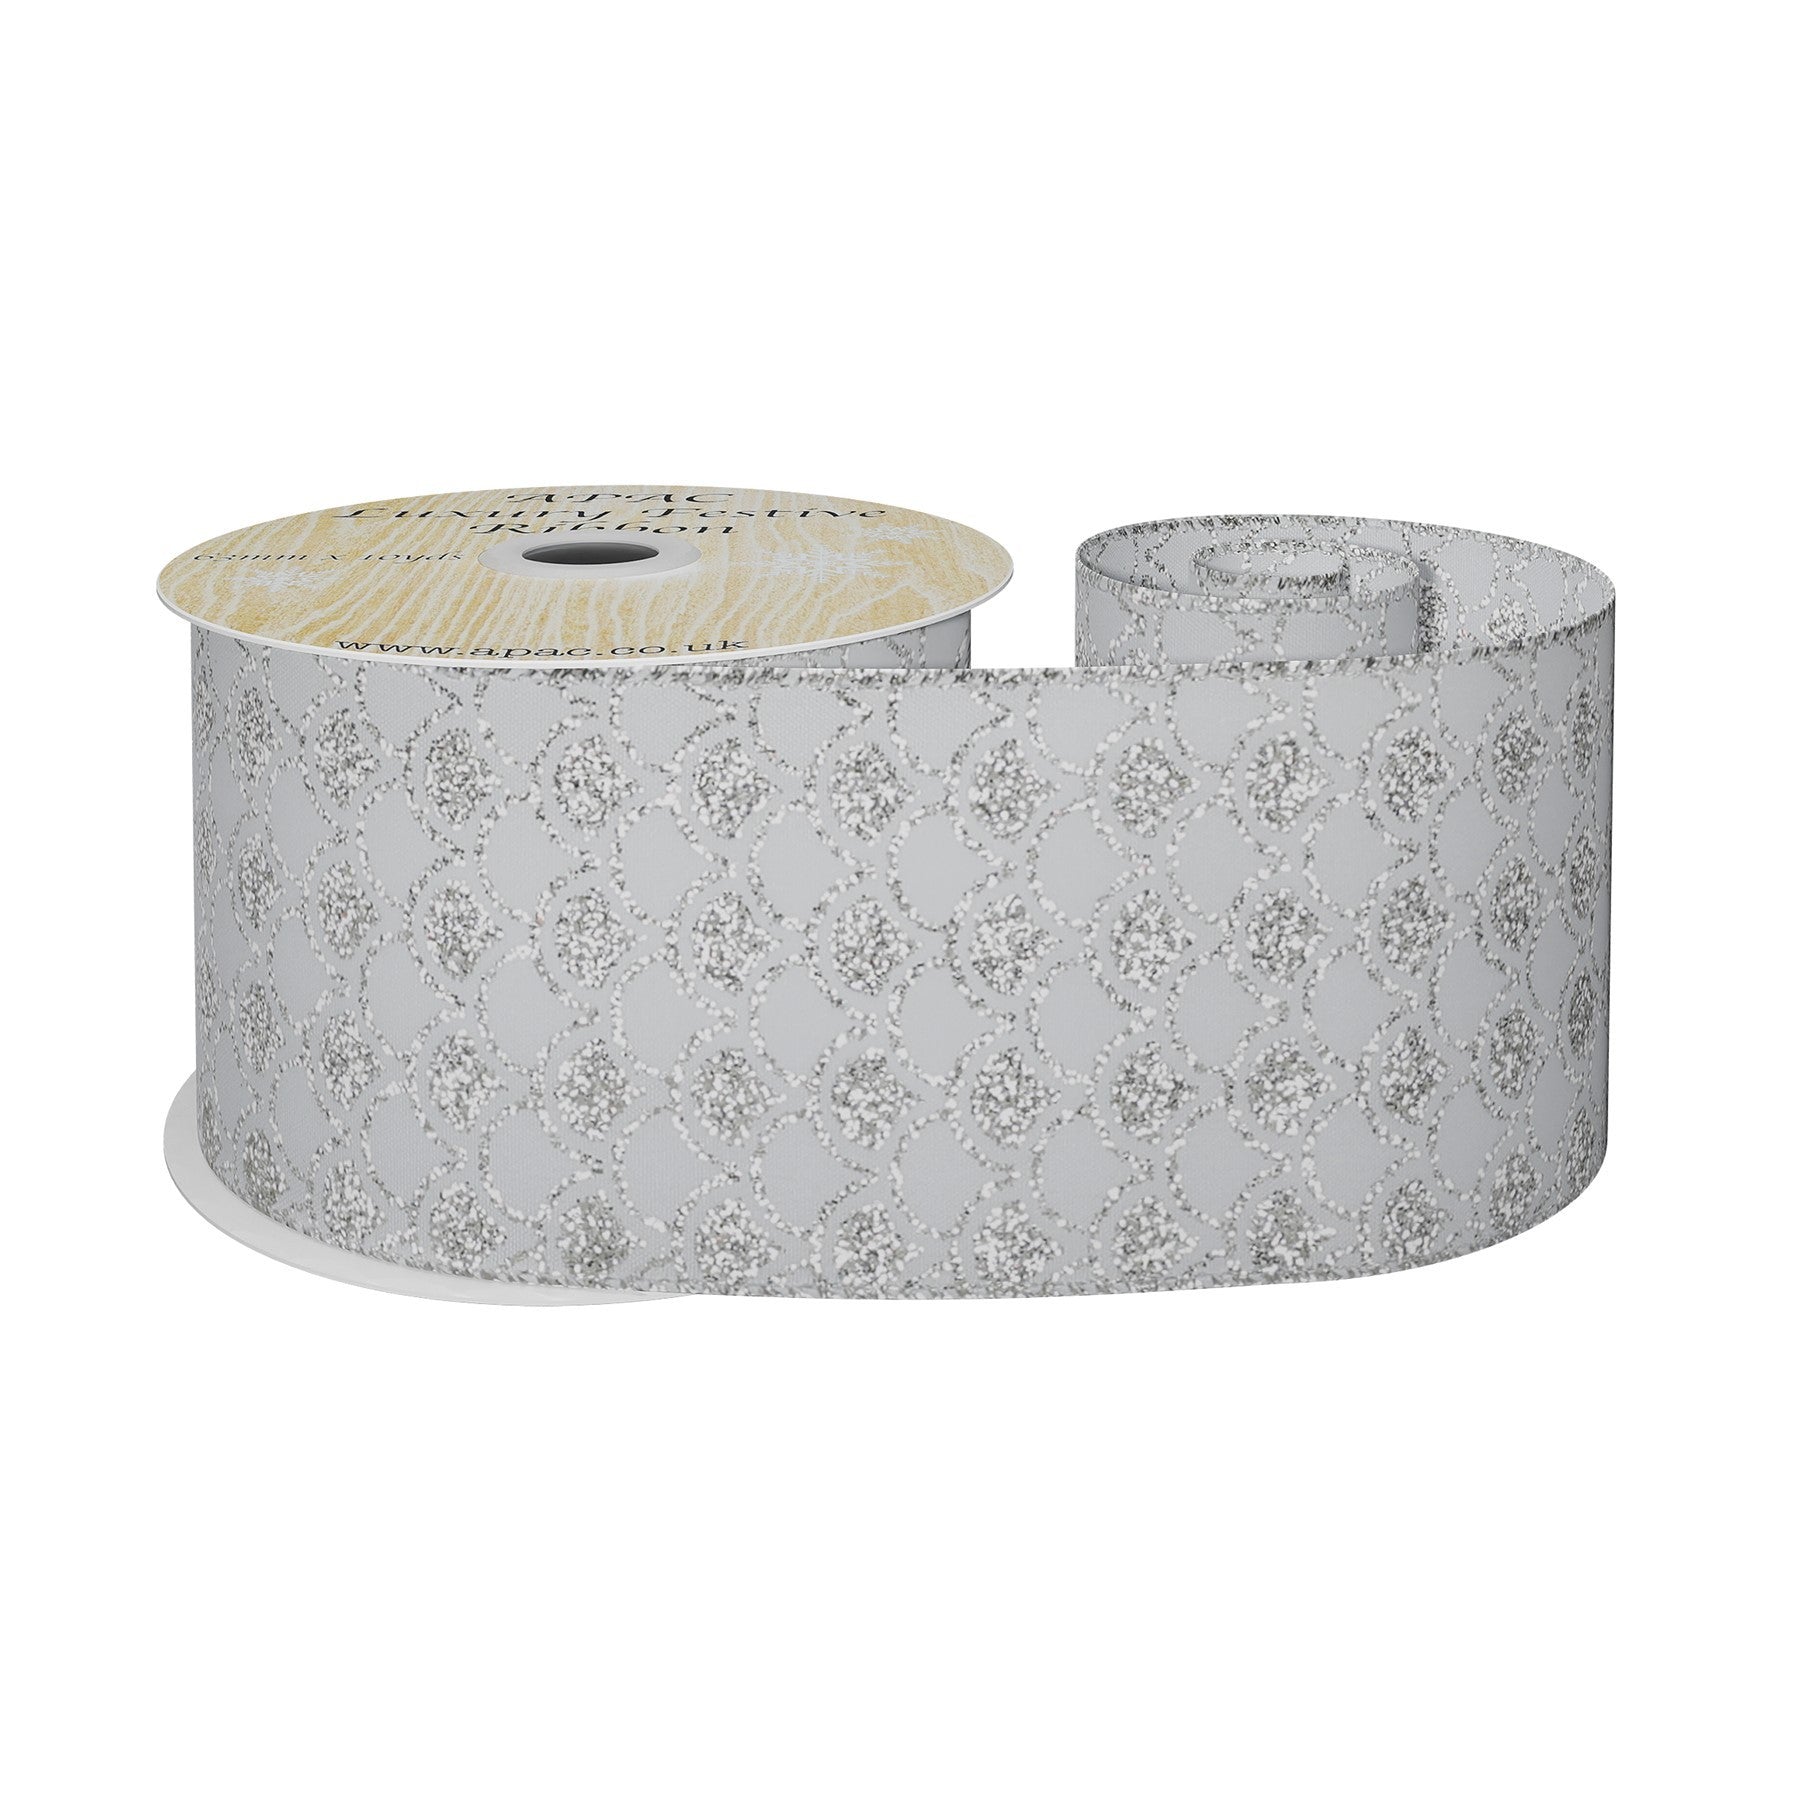 View White Wired Ribbon with Silver Scalloped Detailing 63mm x 10 yards information